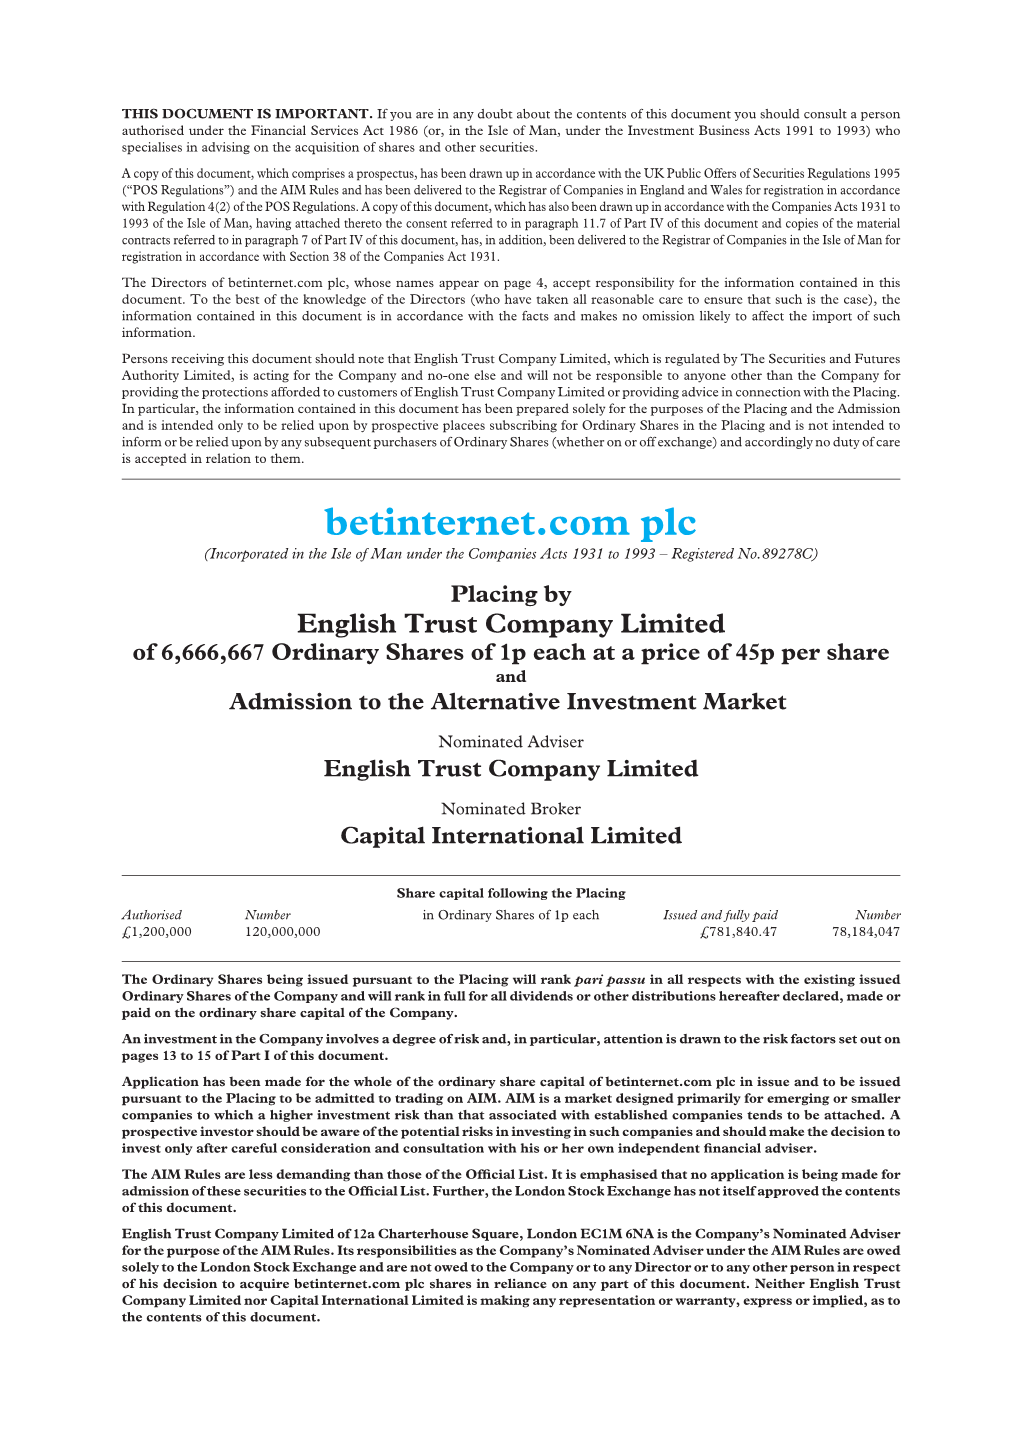 Betinternet.Com Plc, Whose Names Appear on Page 4, Accept Responsibility for the Information Contained in This Document